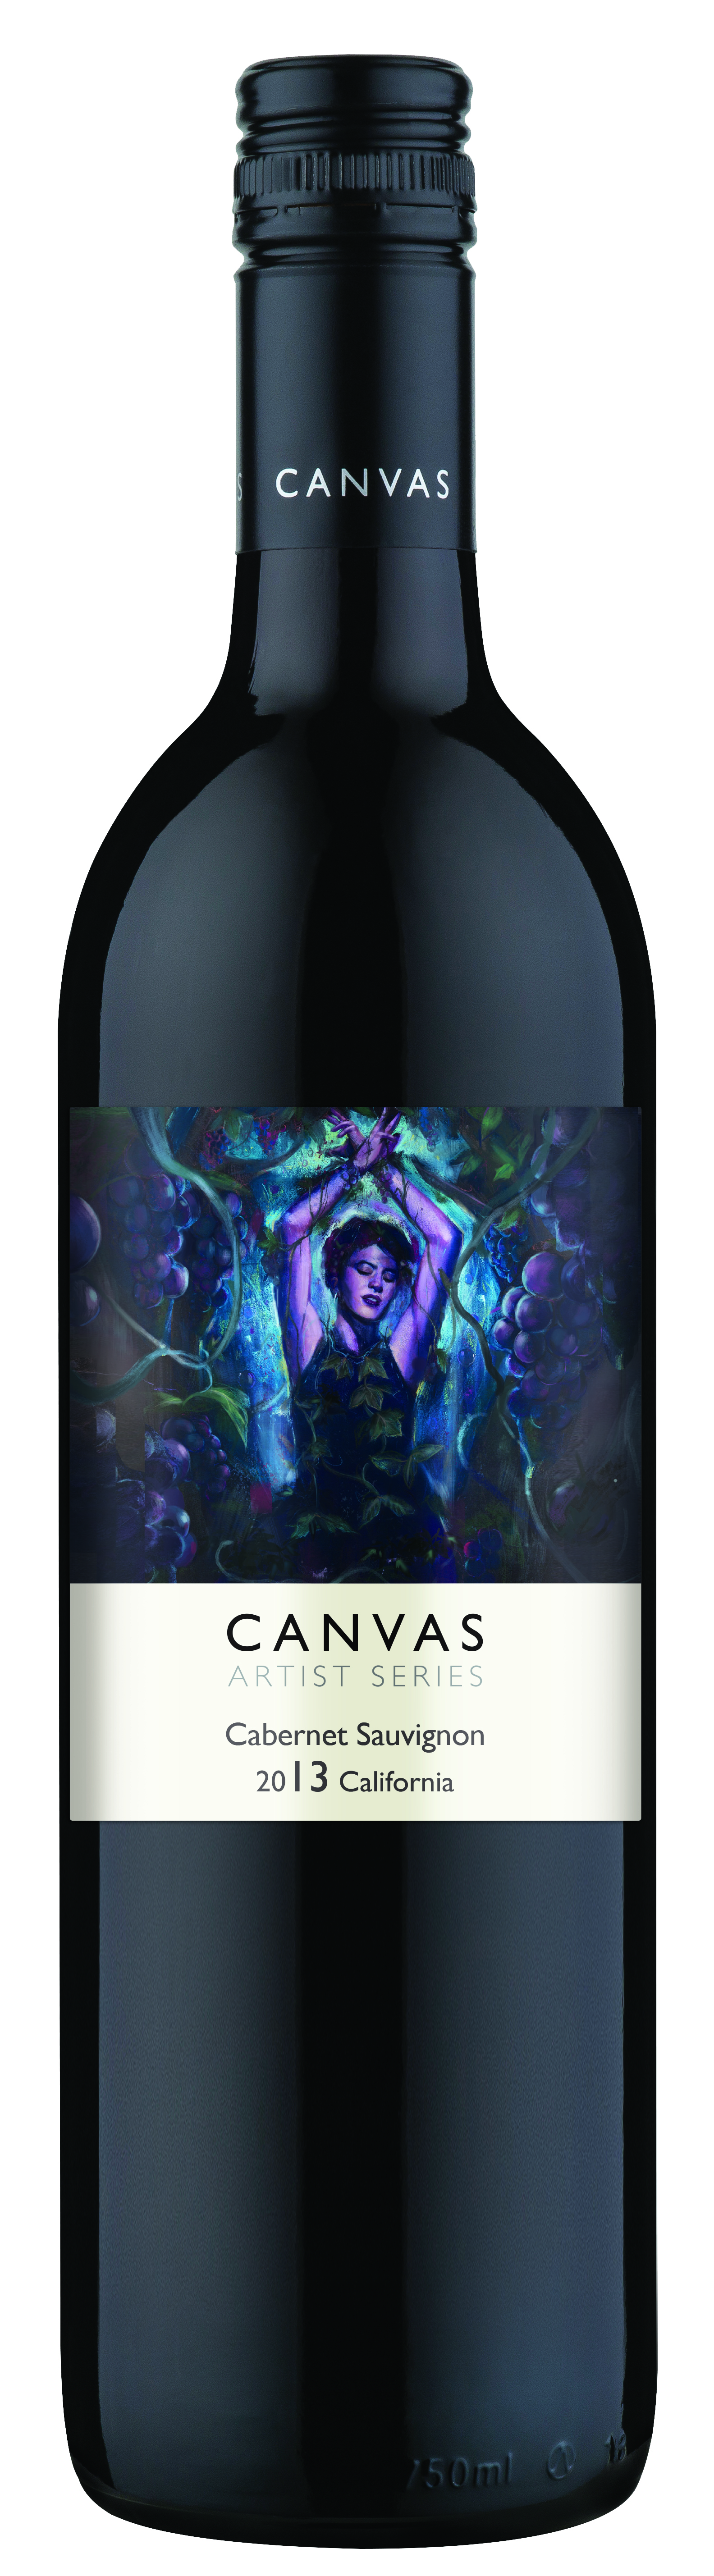 a bottle of wine with a picture of a woman